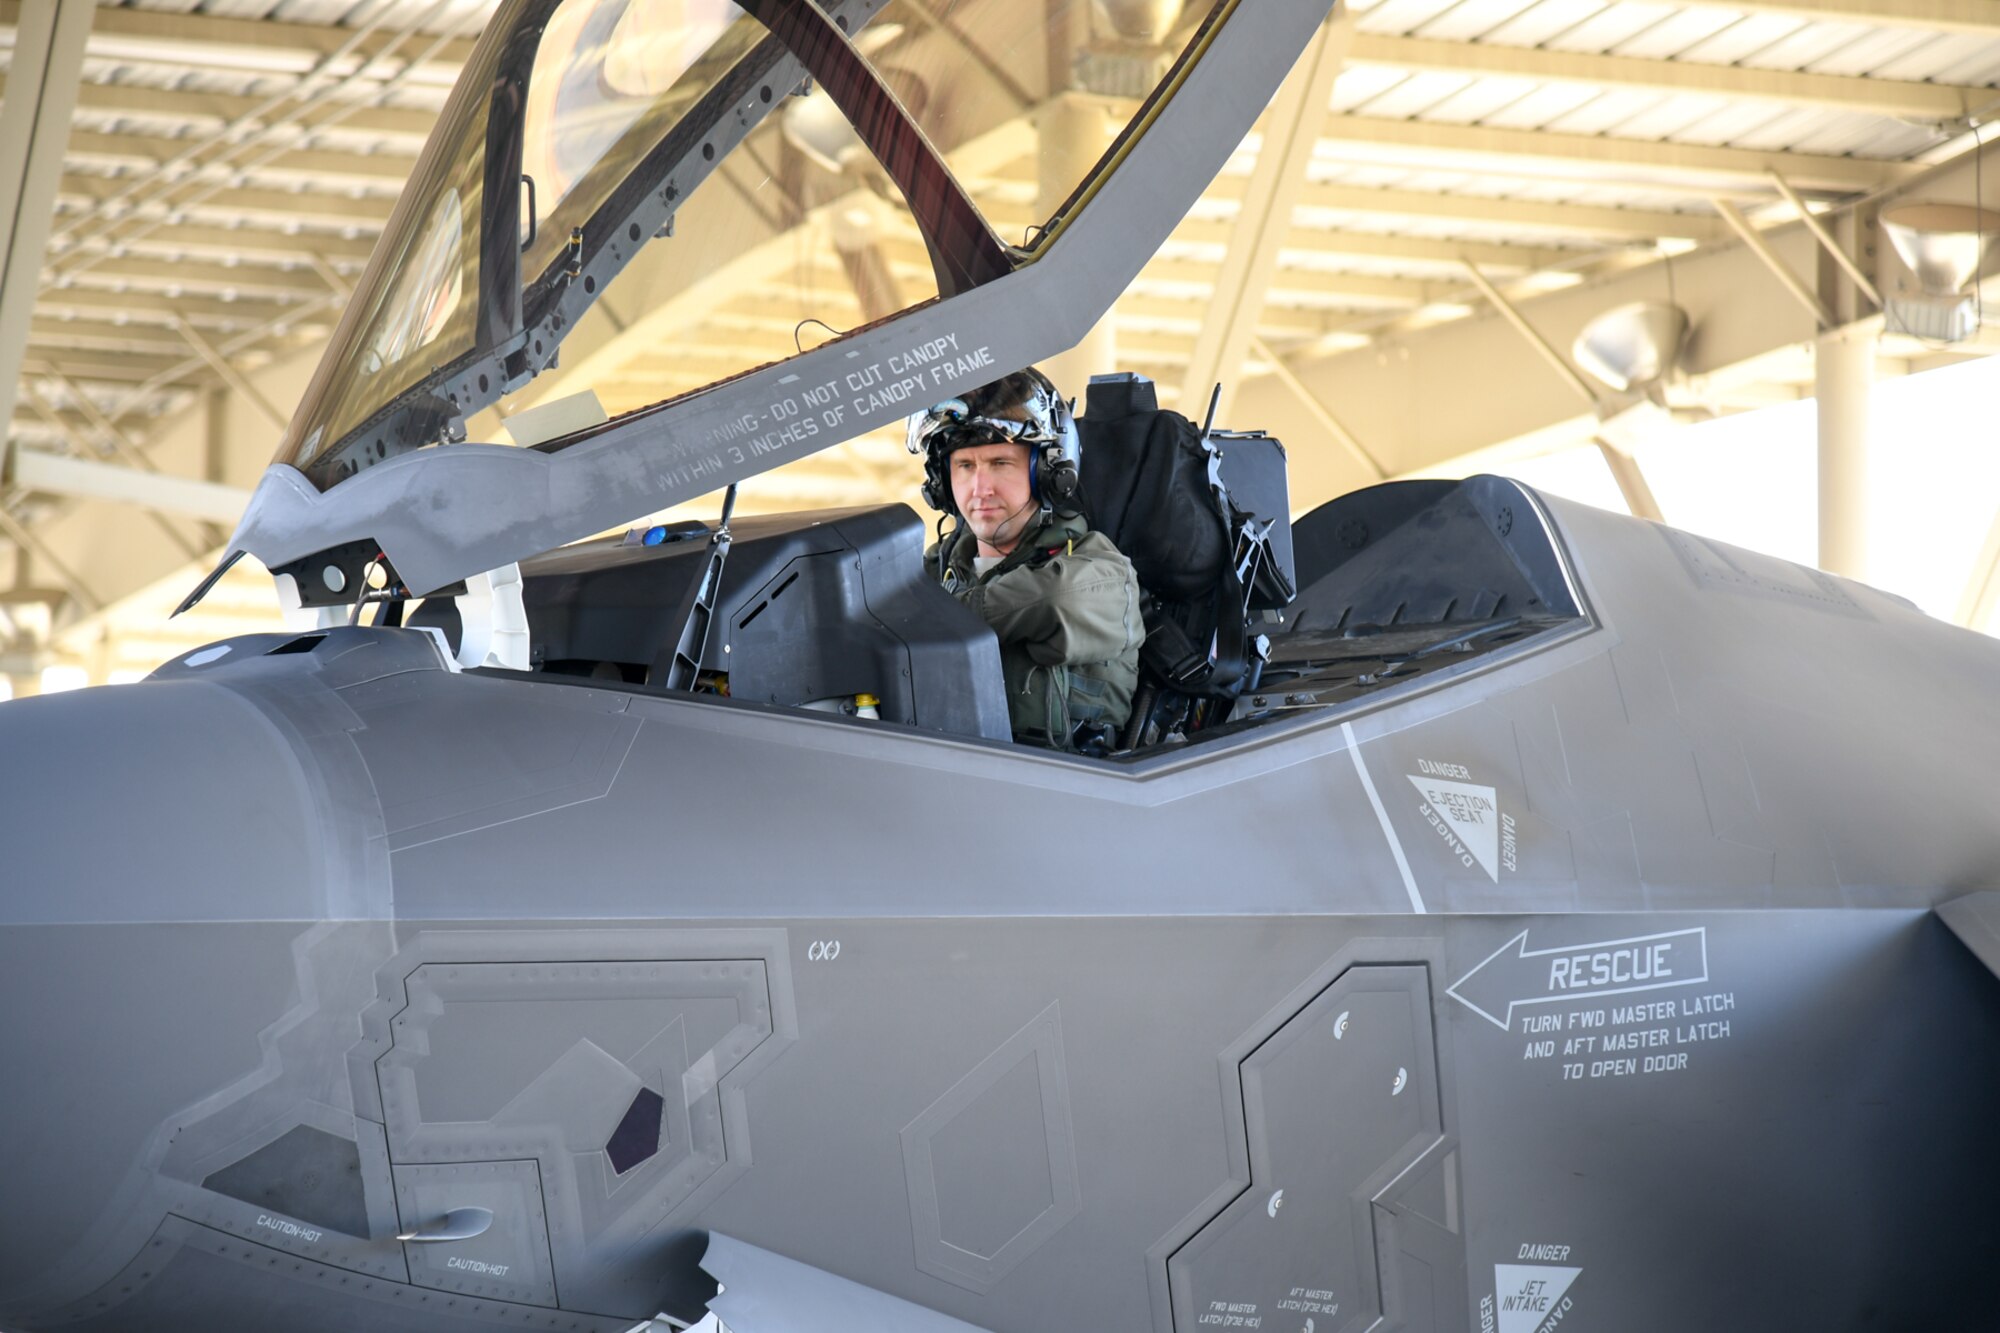 Maj. Daniel Toftness, a reservist in the 419th Fighter Wing, conducts a pre-flight check before a sortie in an F-35A Lightning II Oct. 18, 2018, at Hill Air Force Base, Utah. The flight marked the 10,000th sortie with the aircraft at Hill since the first operational F-35s arrived in September 2015. (U.S. Air Force photo by Cynthia Griggs)